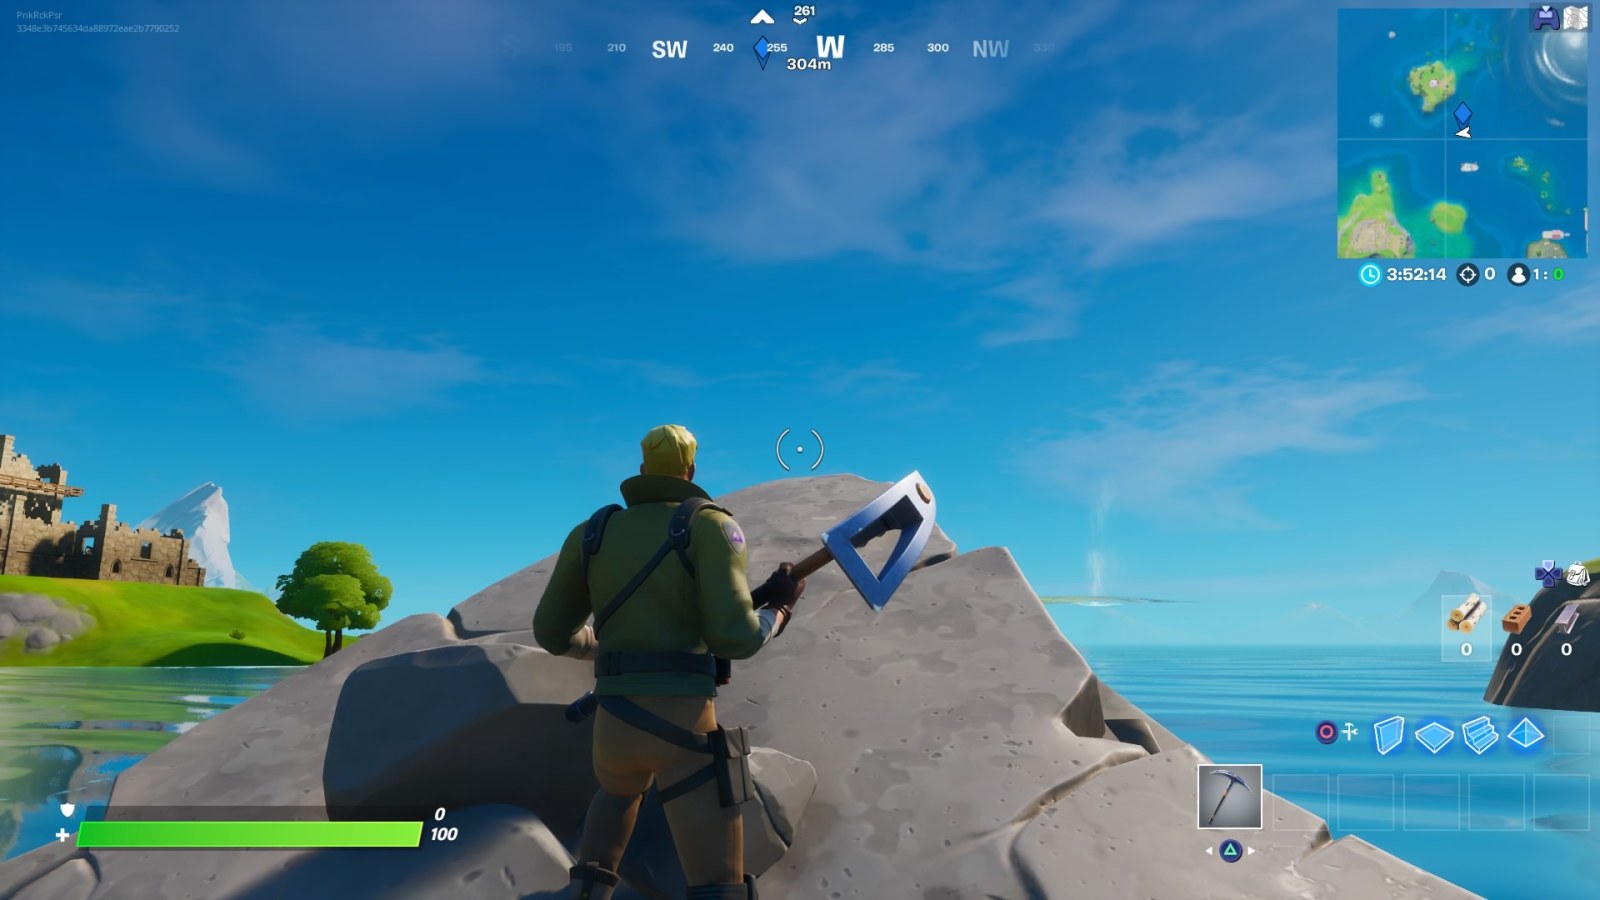 Fortnite Claim Your Trident At Coral Cove Locations Week 5 Aquaman Guide